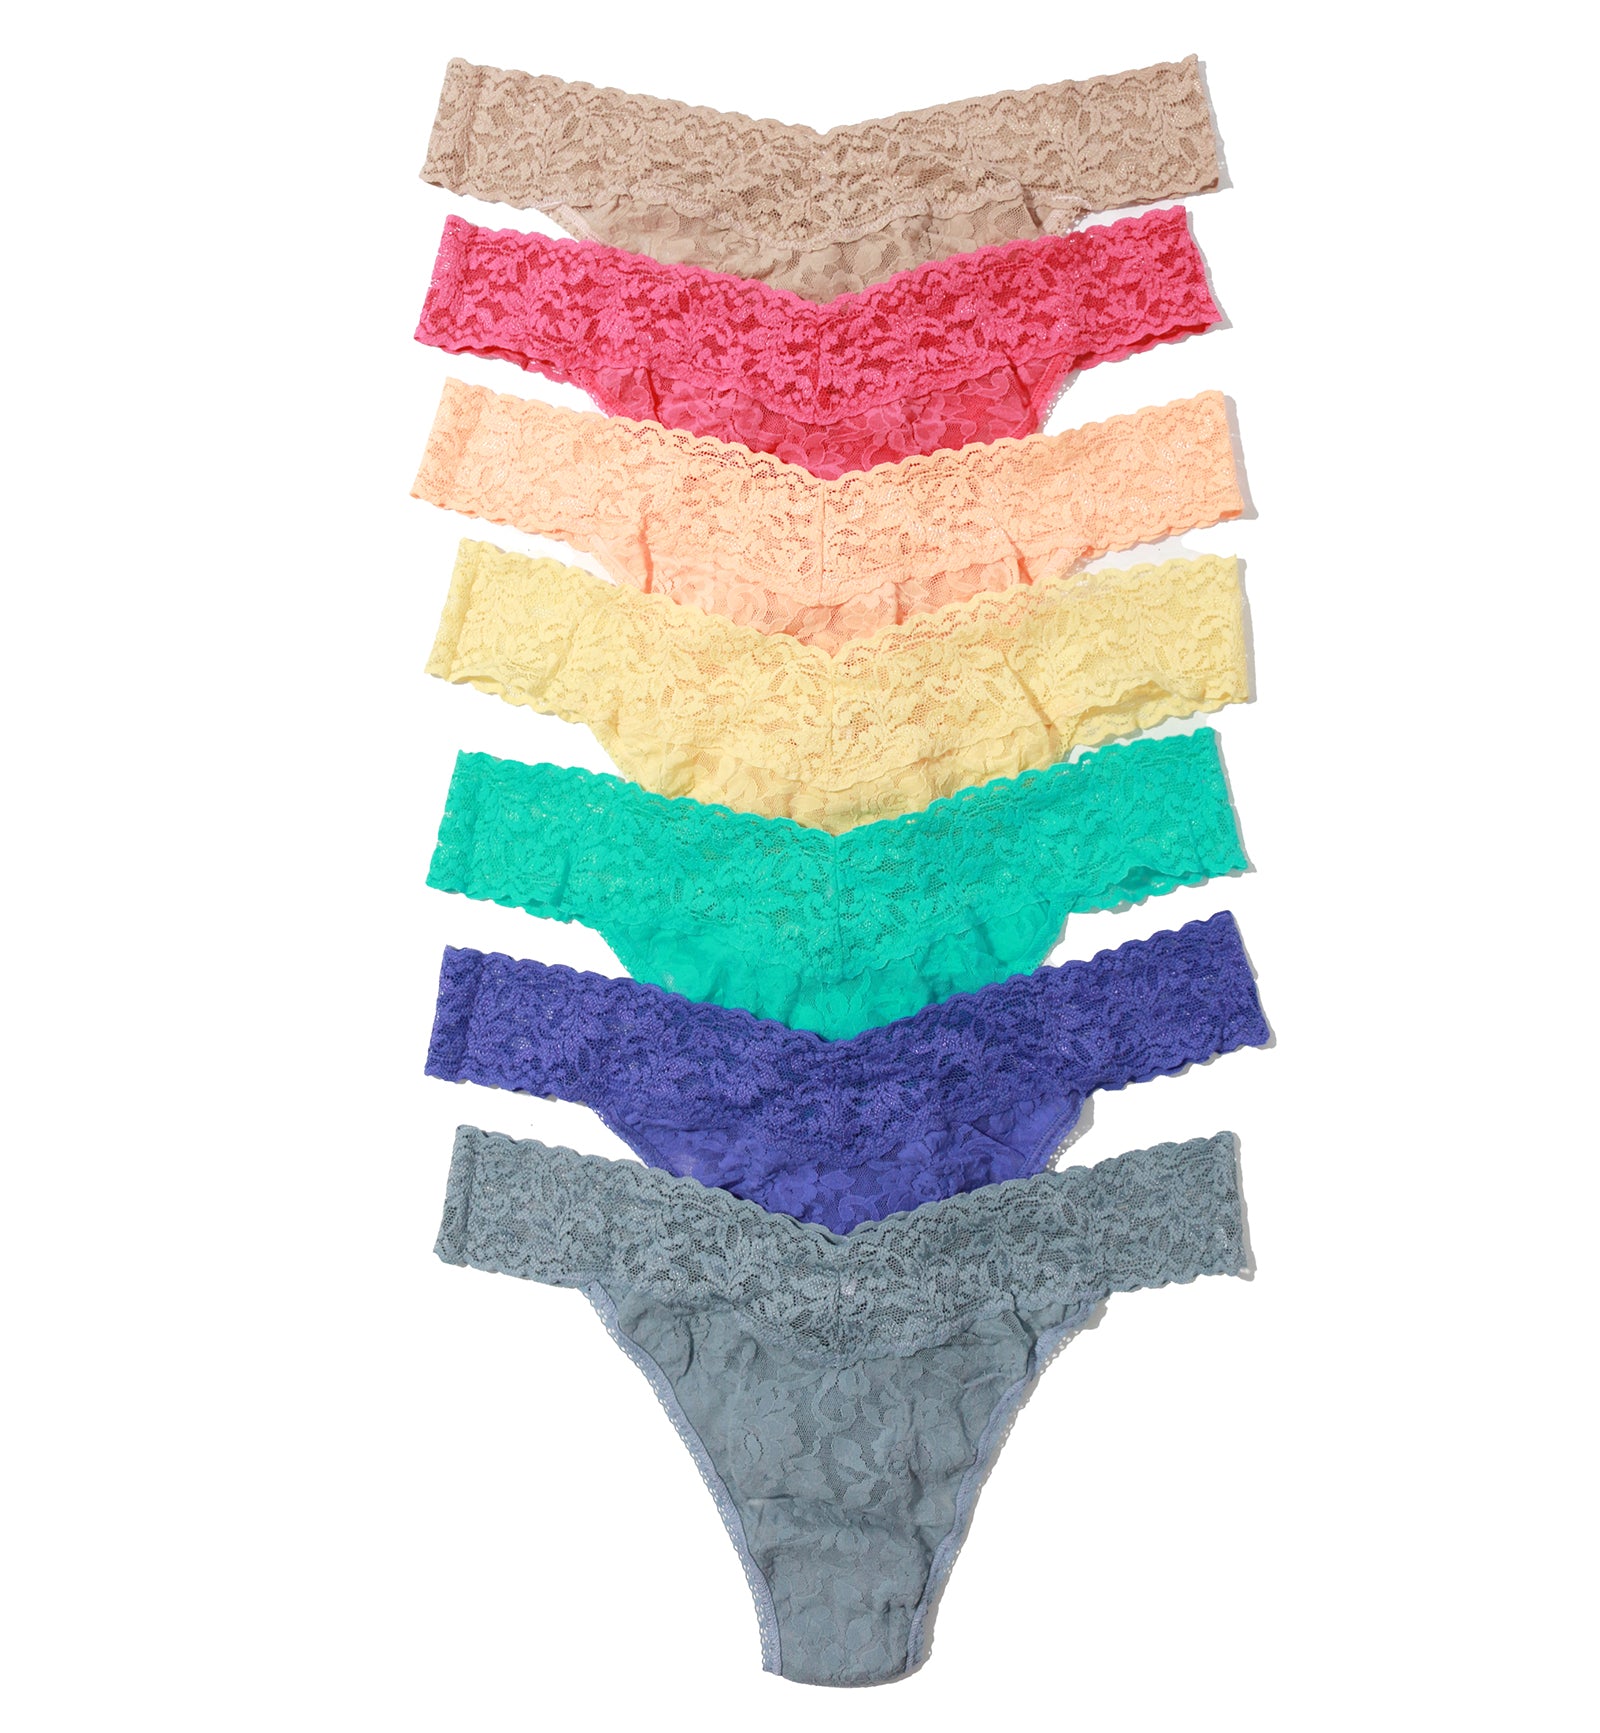 Hanky Panky Days of the Week 7-PACK Signature Lace Original Rise Thong (48117BX),7DOW - 7DOW,One Size